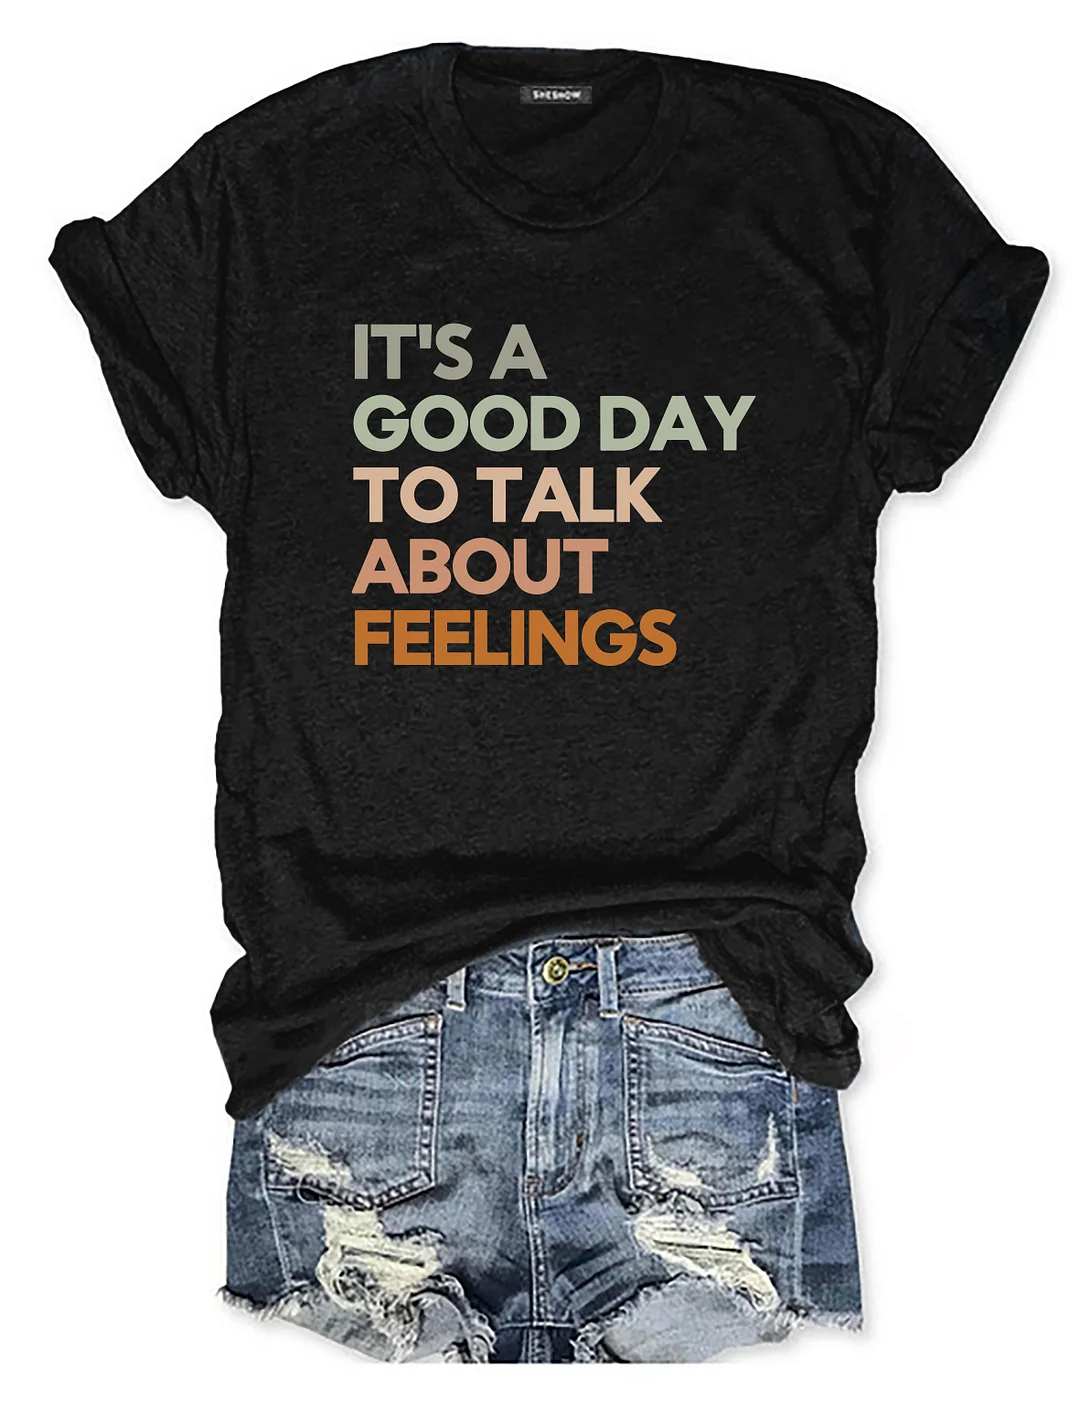 Good Day to Talk About Feelings T-Shirt